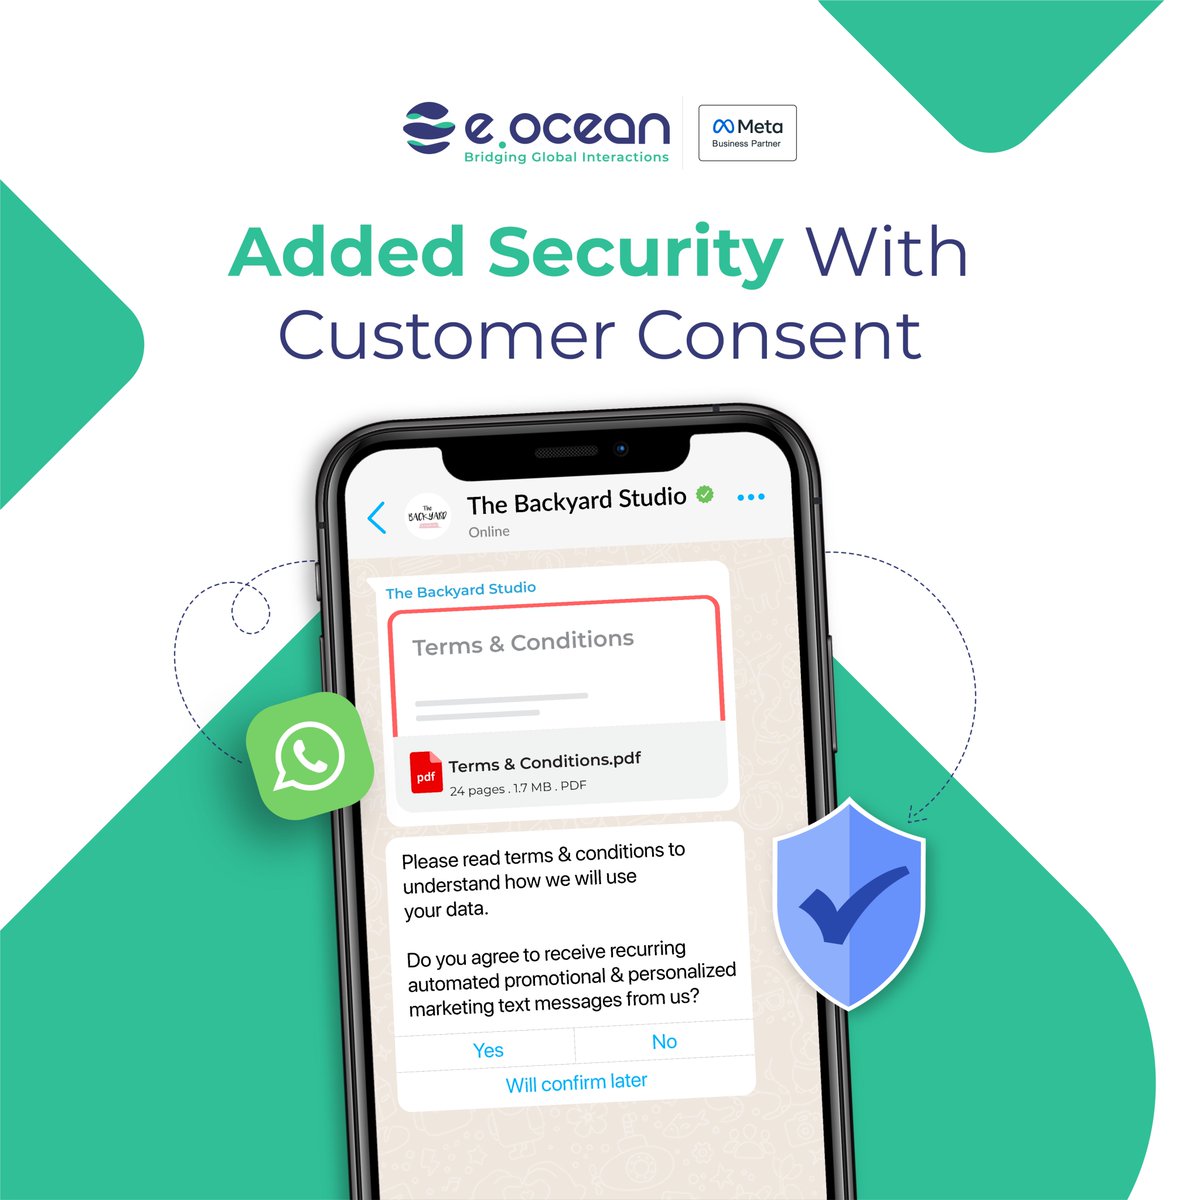 Eocean constantly outsmarts itself with the latest trends and developments in technology while keeping in check all the necessary security measures.

#marketing #security #privacy #technology #whatsappbusinessapi